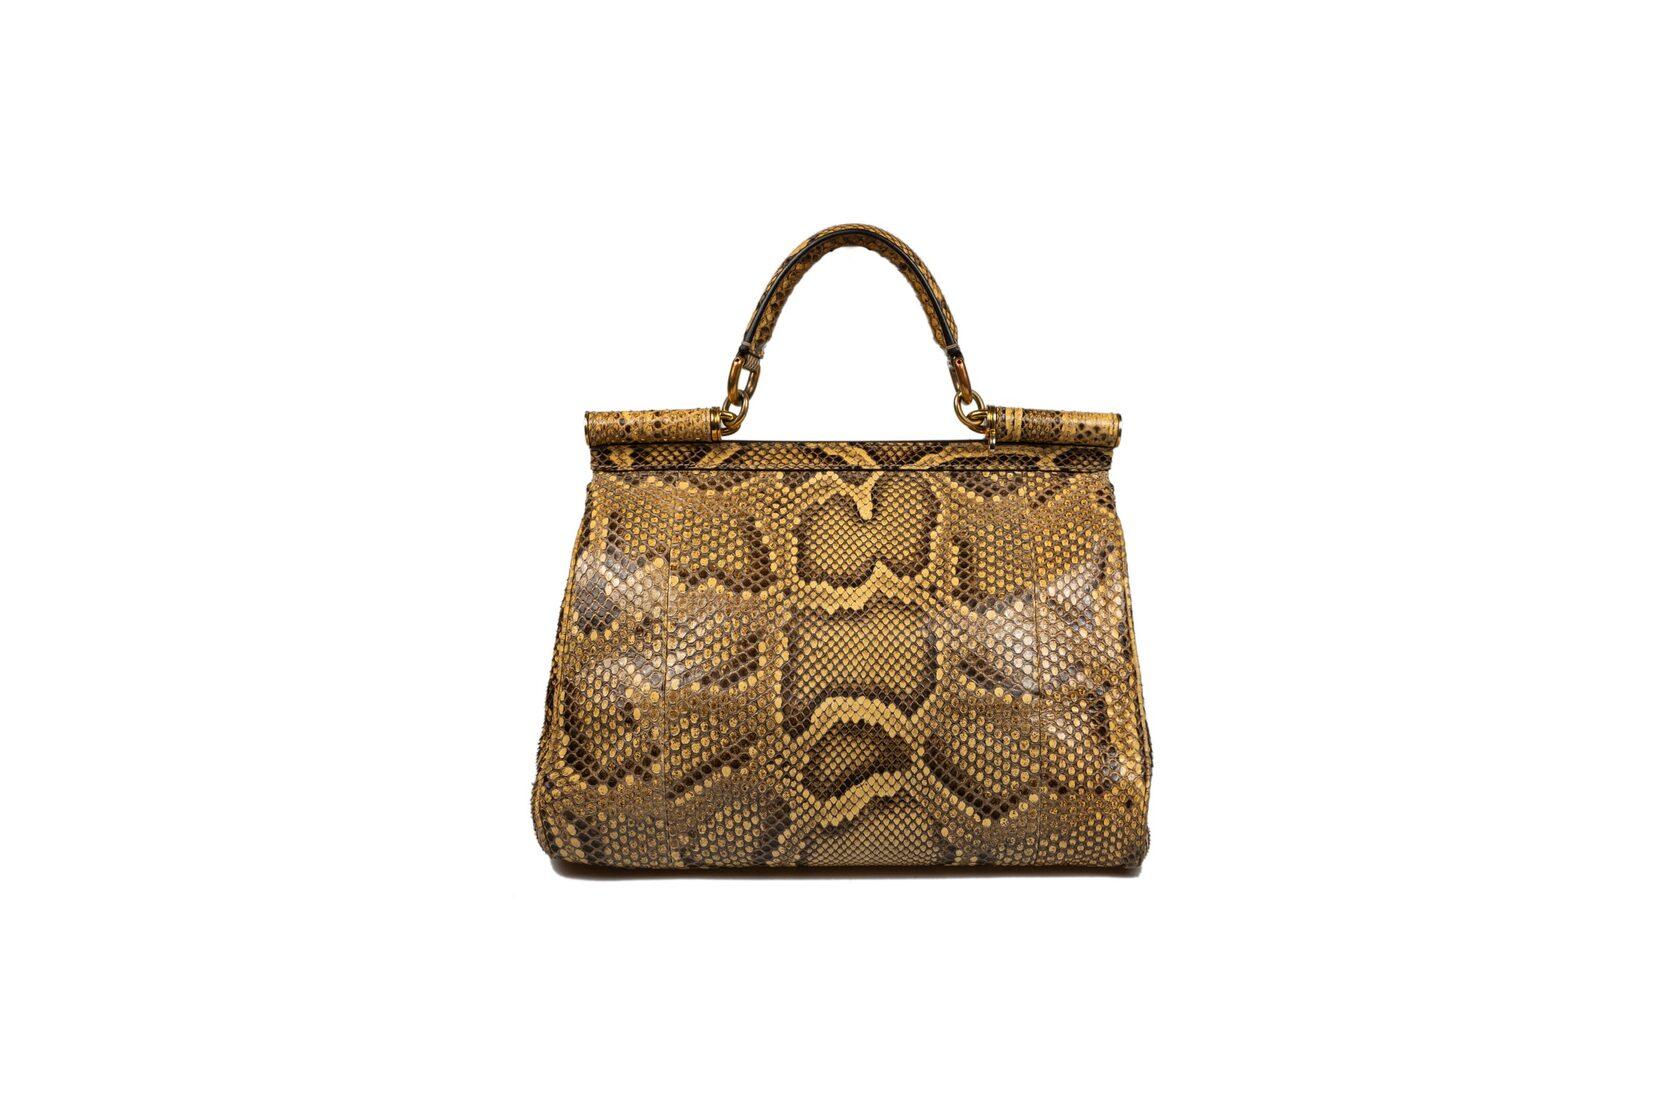 Dolce Gabbana Sicily Tote Bag Python Leather For Sale 3